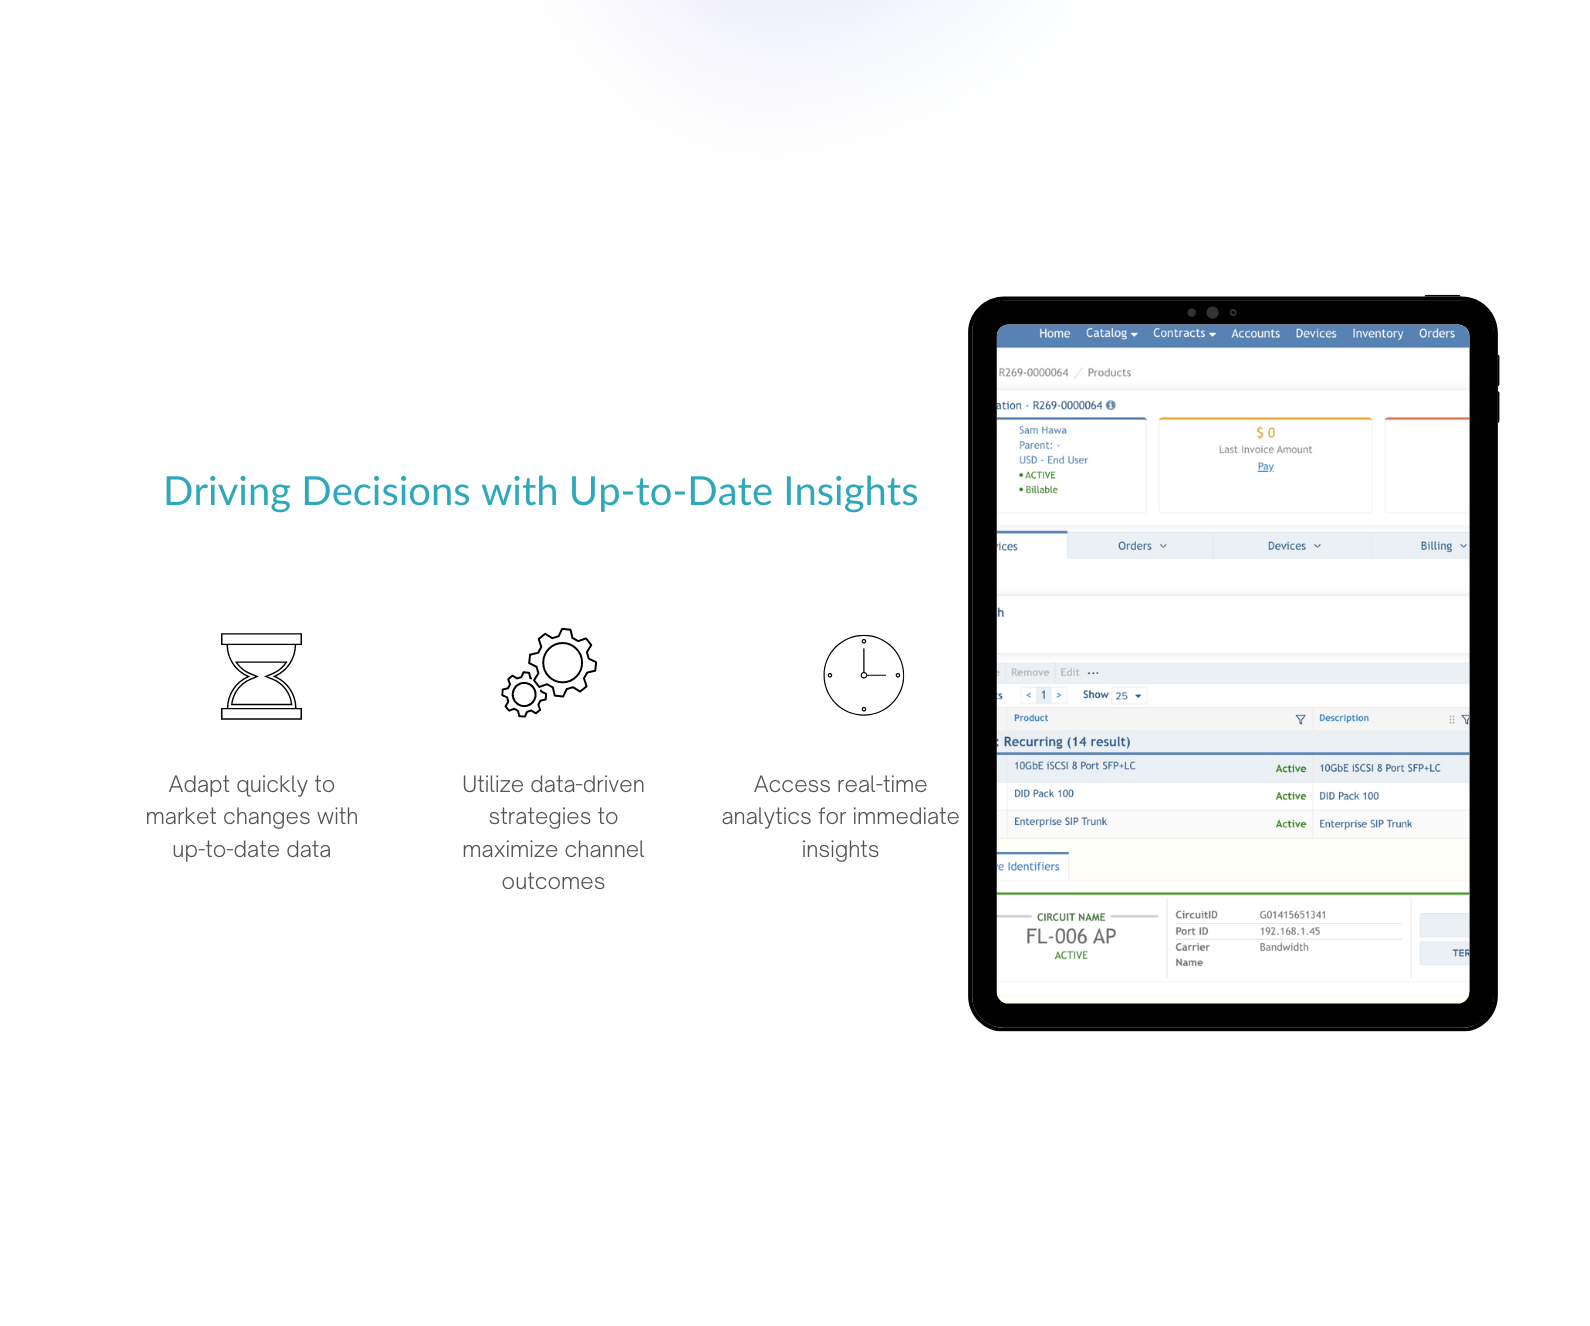 Driving Decisions with Up-to-Date Insights